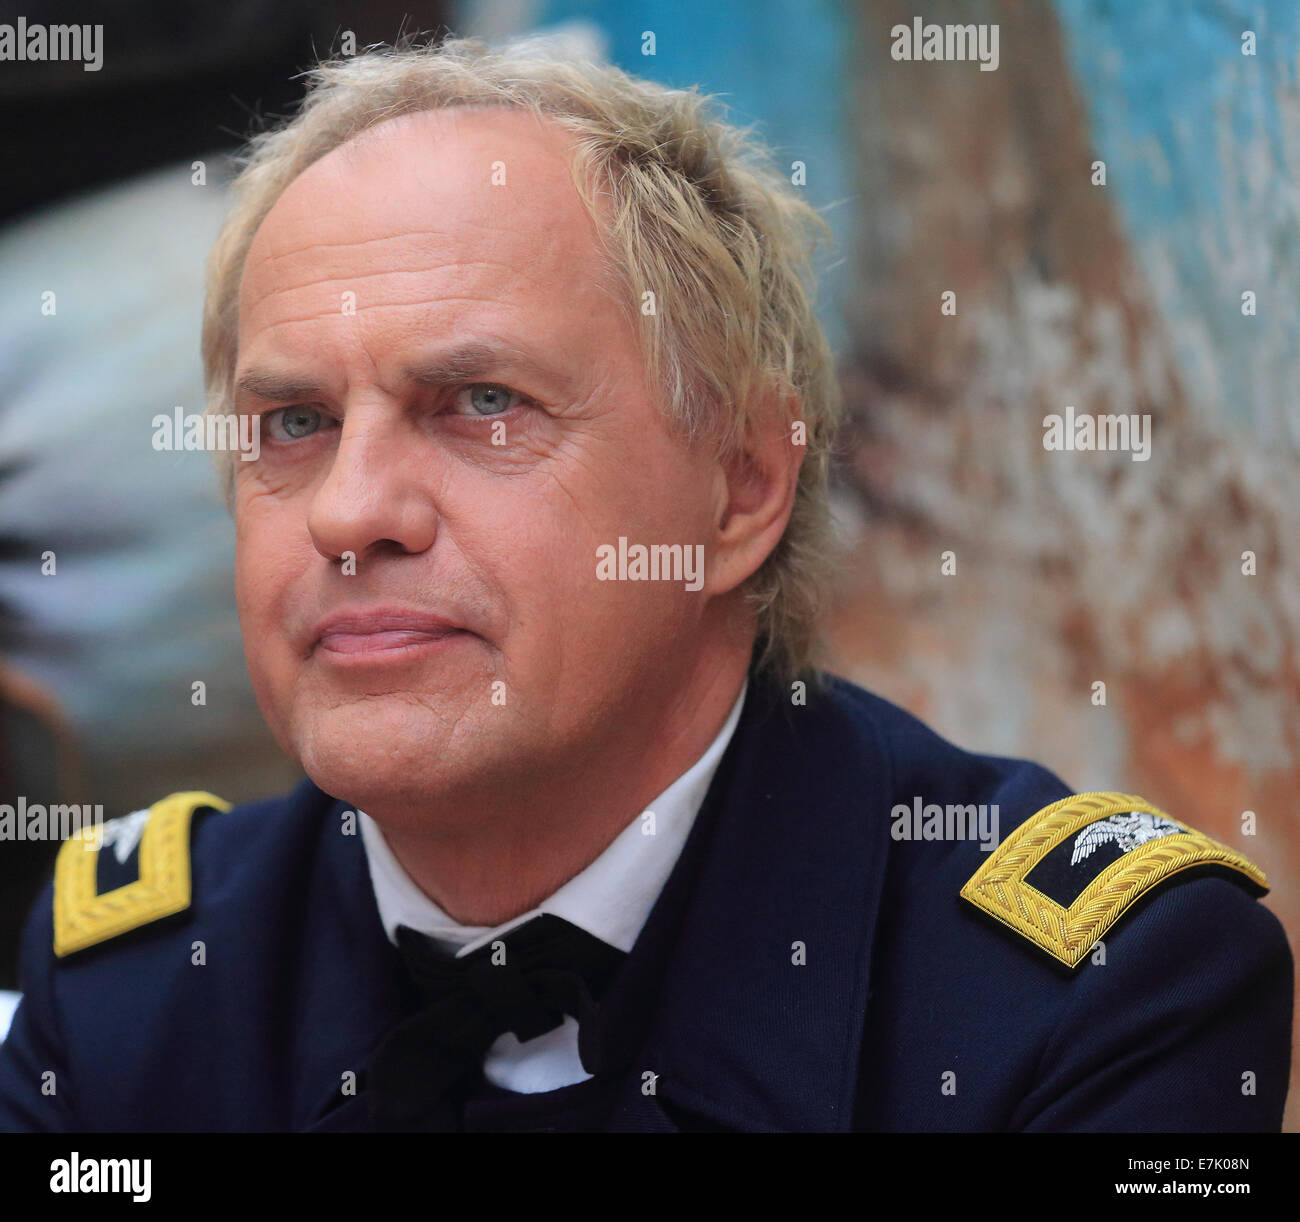 Thale, Germany. 19th Sep, 2014. Actor Uwe Ochsenknecht in the role of a general attends a press date for the children's movie 'Winnetous Sohn' (lit. Winnetou's son) at Bergtheater in Thale, Germany, 19 September 2014. The shooting of the film will continue in Saxony-Anhalt until 26 September 2014. The script of the film won the tendering for the realisation of original scripts for children's movies. Winnetous son is the first film which is promoted by the nation-wide innitiative and is expected to come to German cinemas on 09 May 201. Photo: Jens Wolf/dpa/Alamy Live News Stock Photo